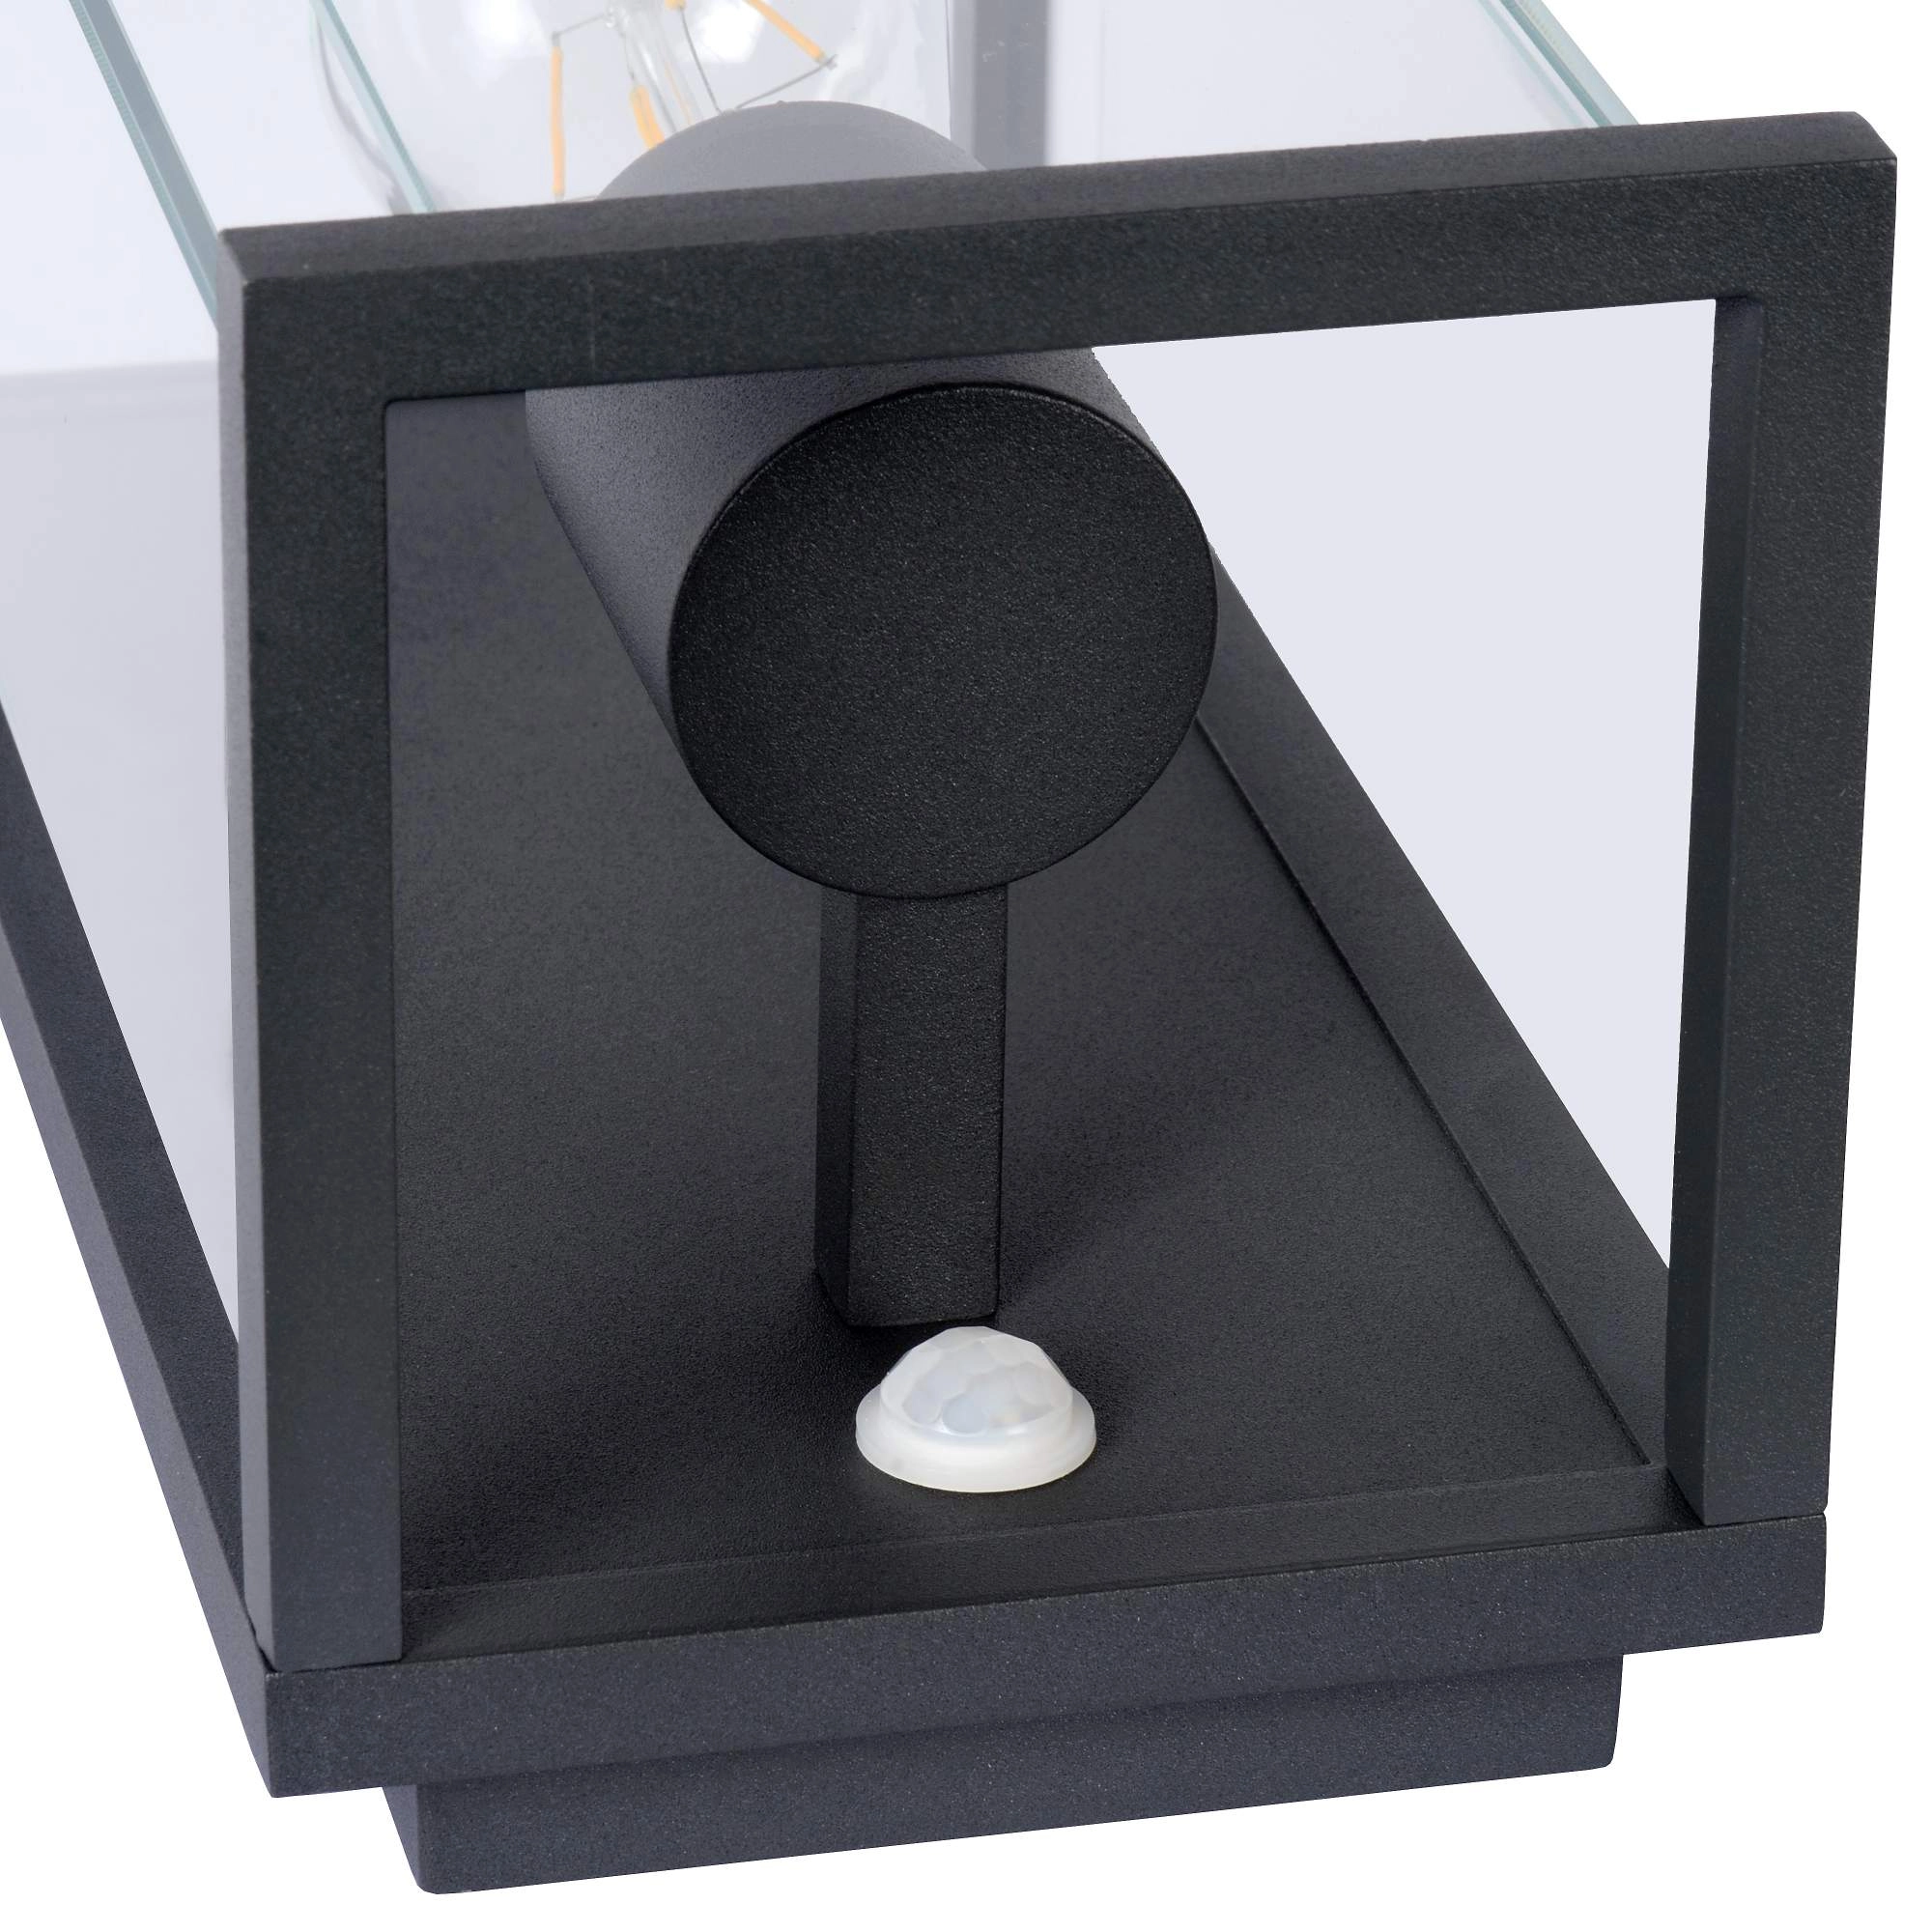 LU 27883/11/30 Lucide CLAIRE - Wall light Outdoor - 1xE27 - IP54 - Anthracite